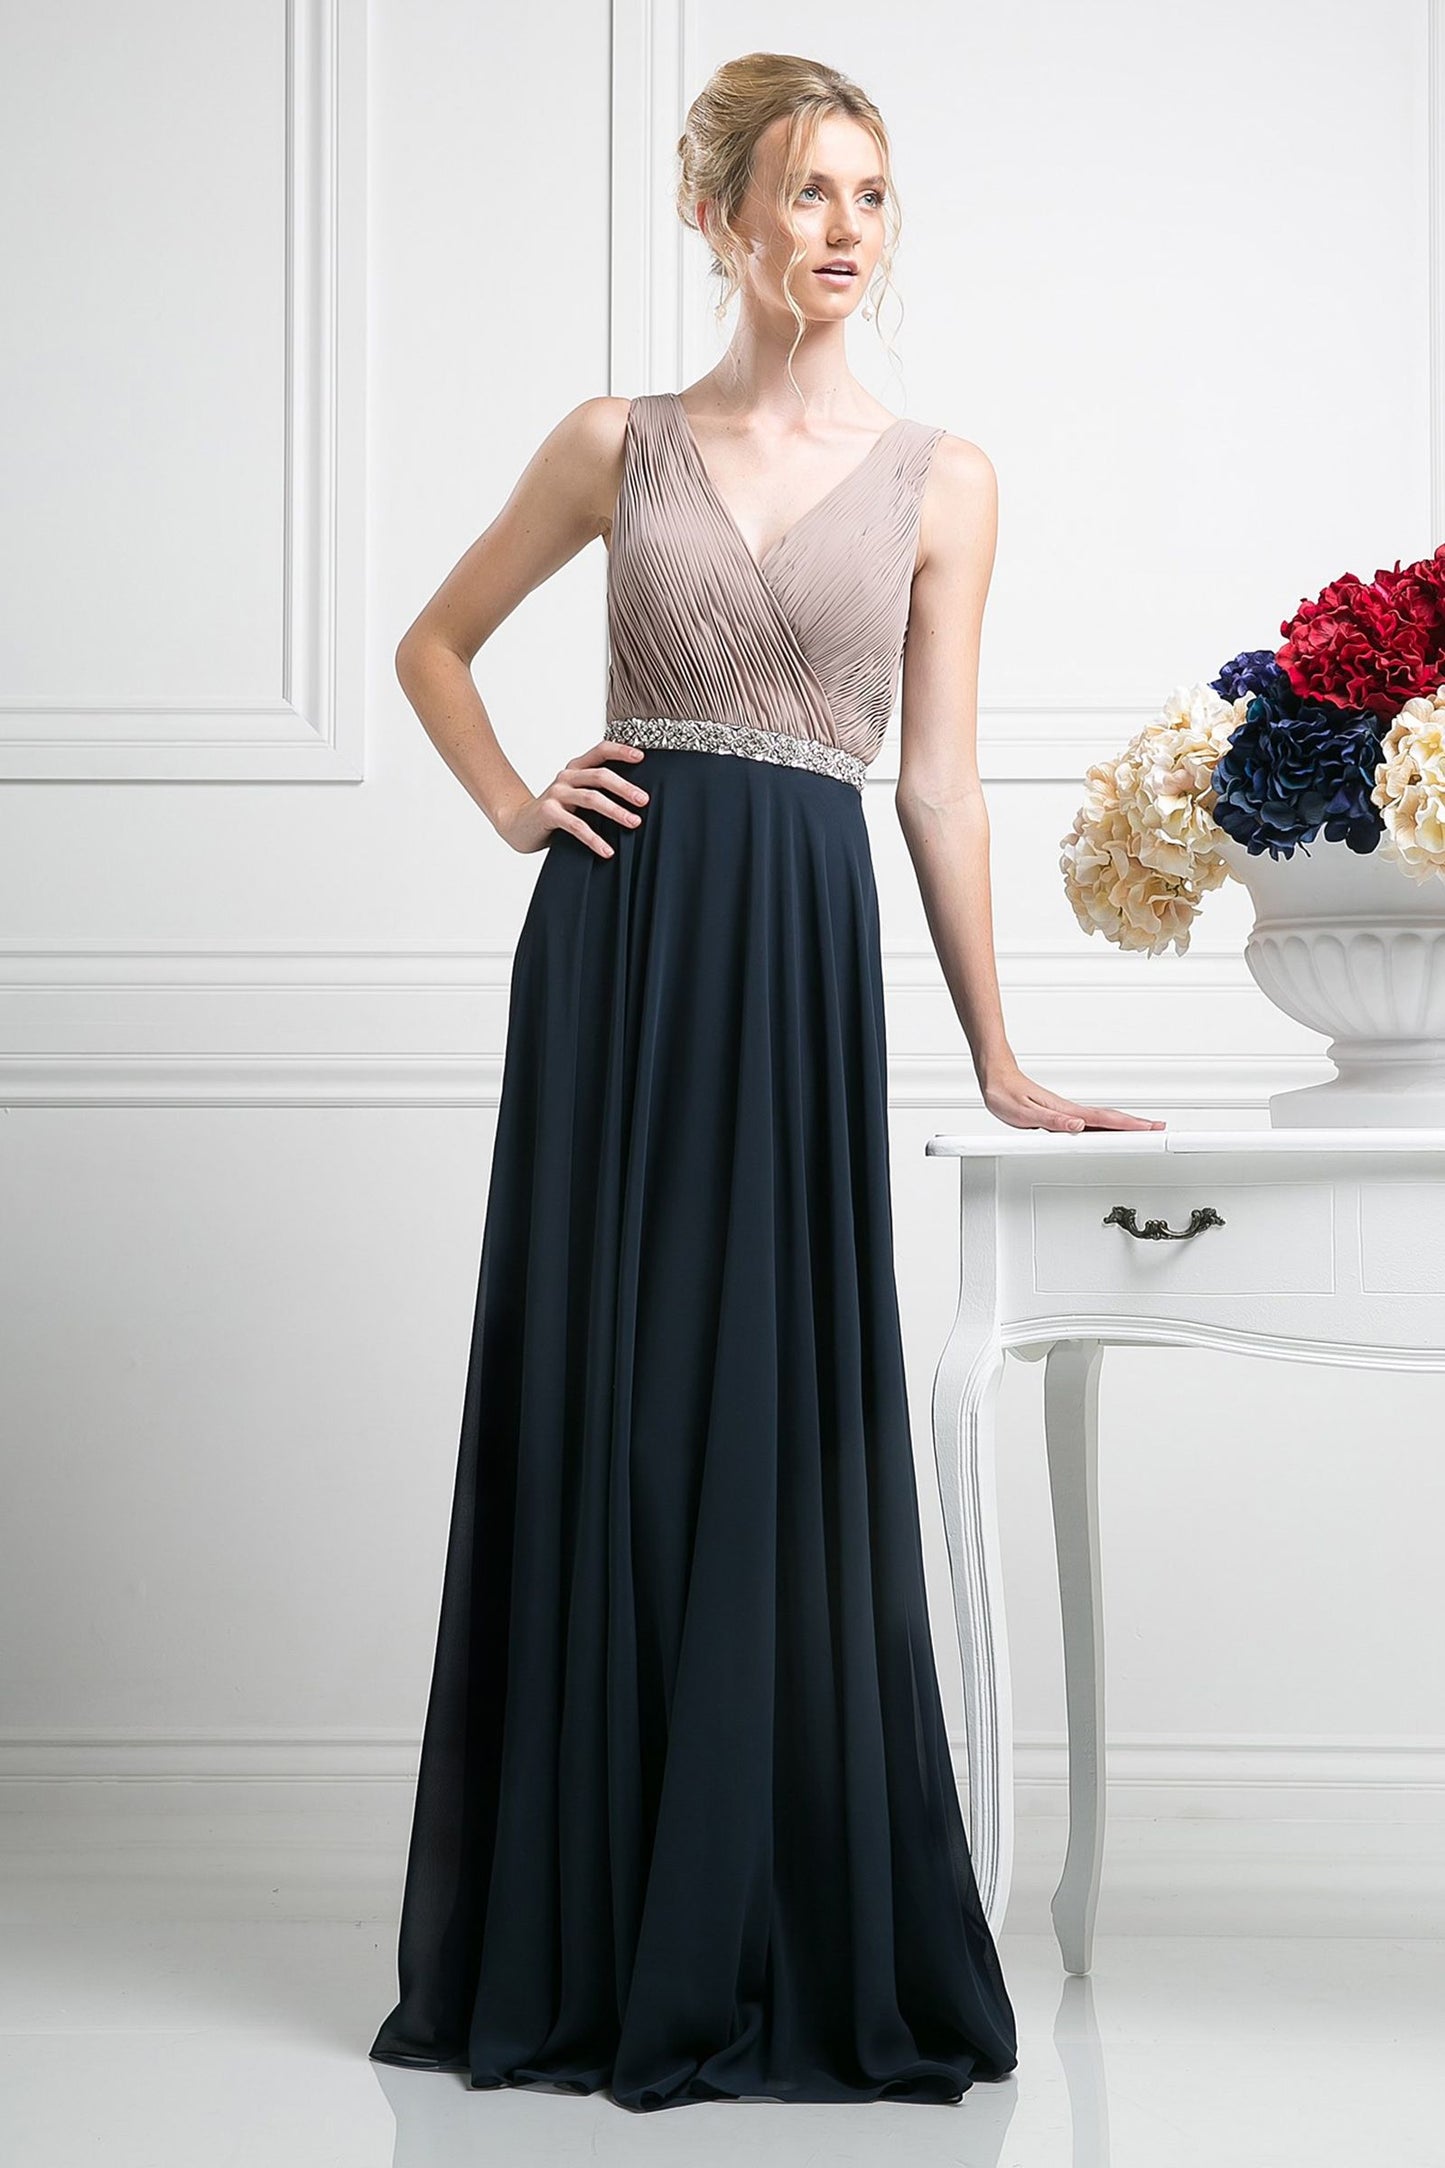 Ladivine 1968 A-Line Chiffon Evening Dress - An elegant gown featuring a pleated V-neck bodice and beaded belt, perfect for evening events.